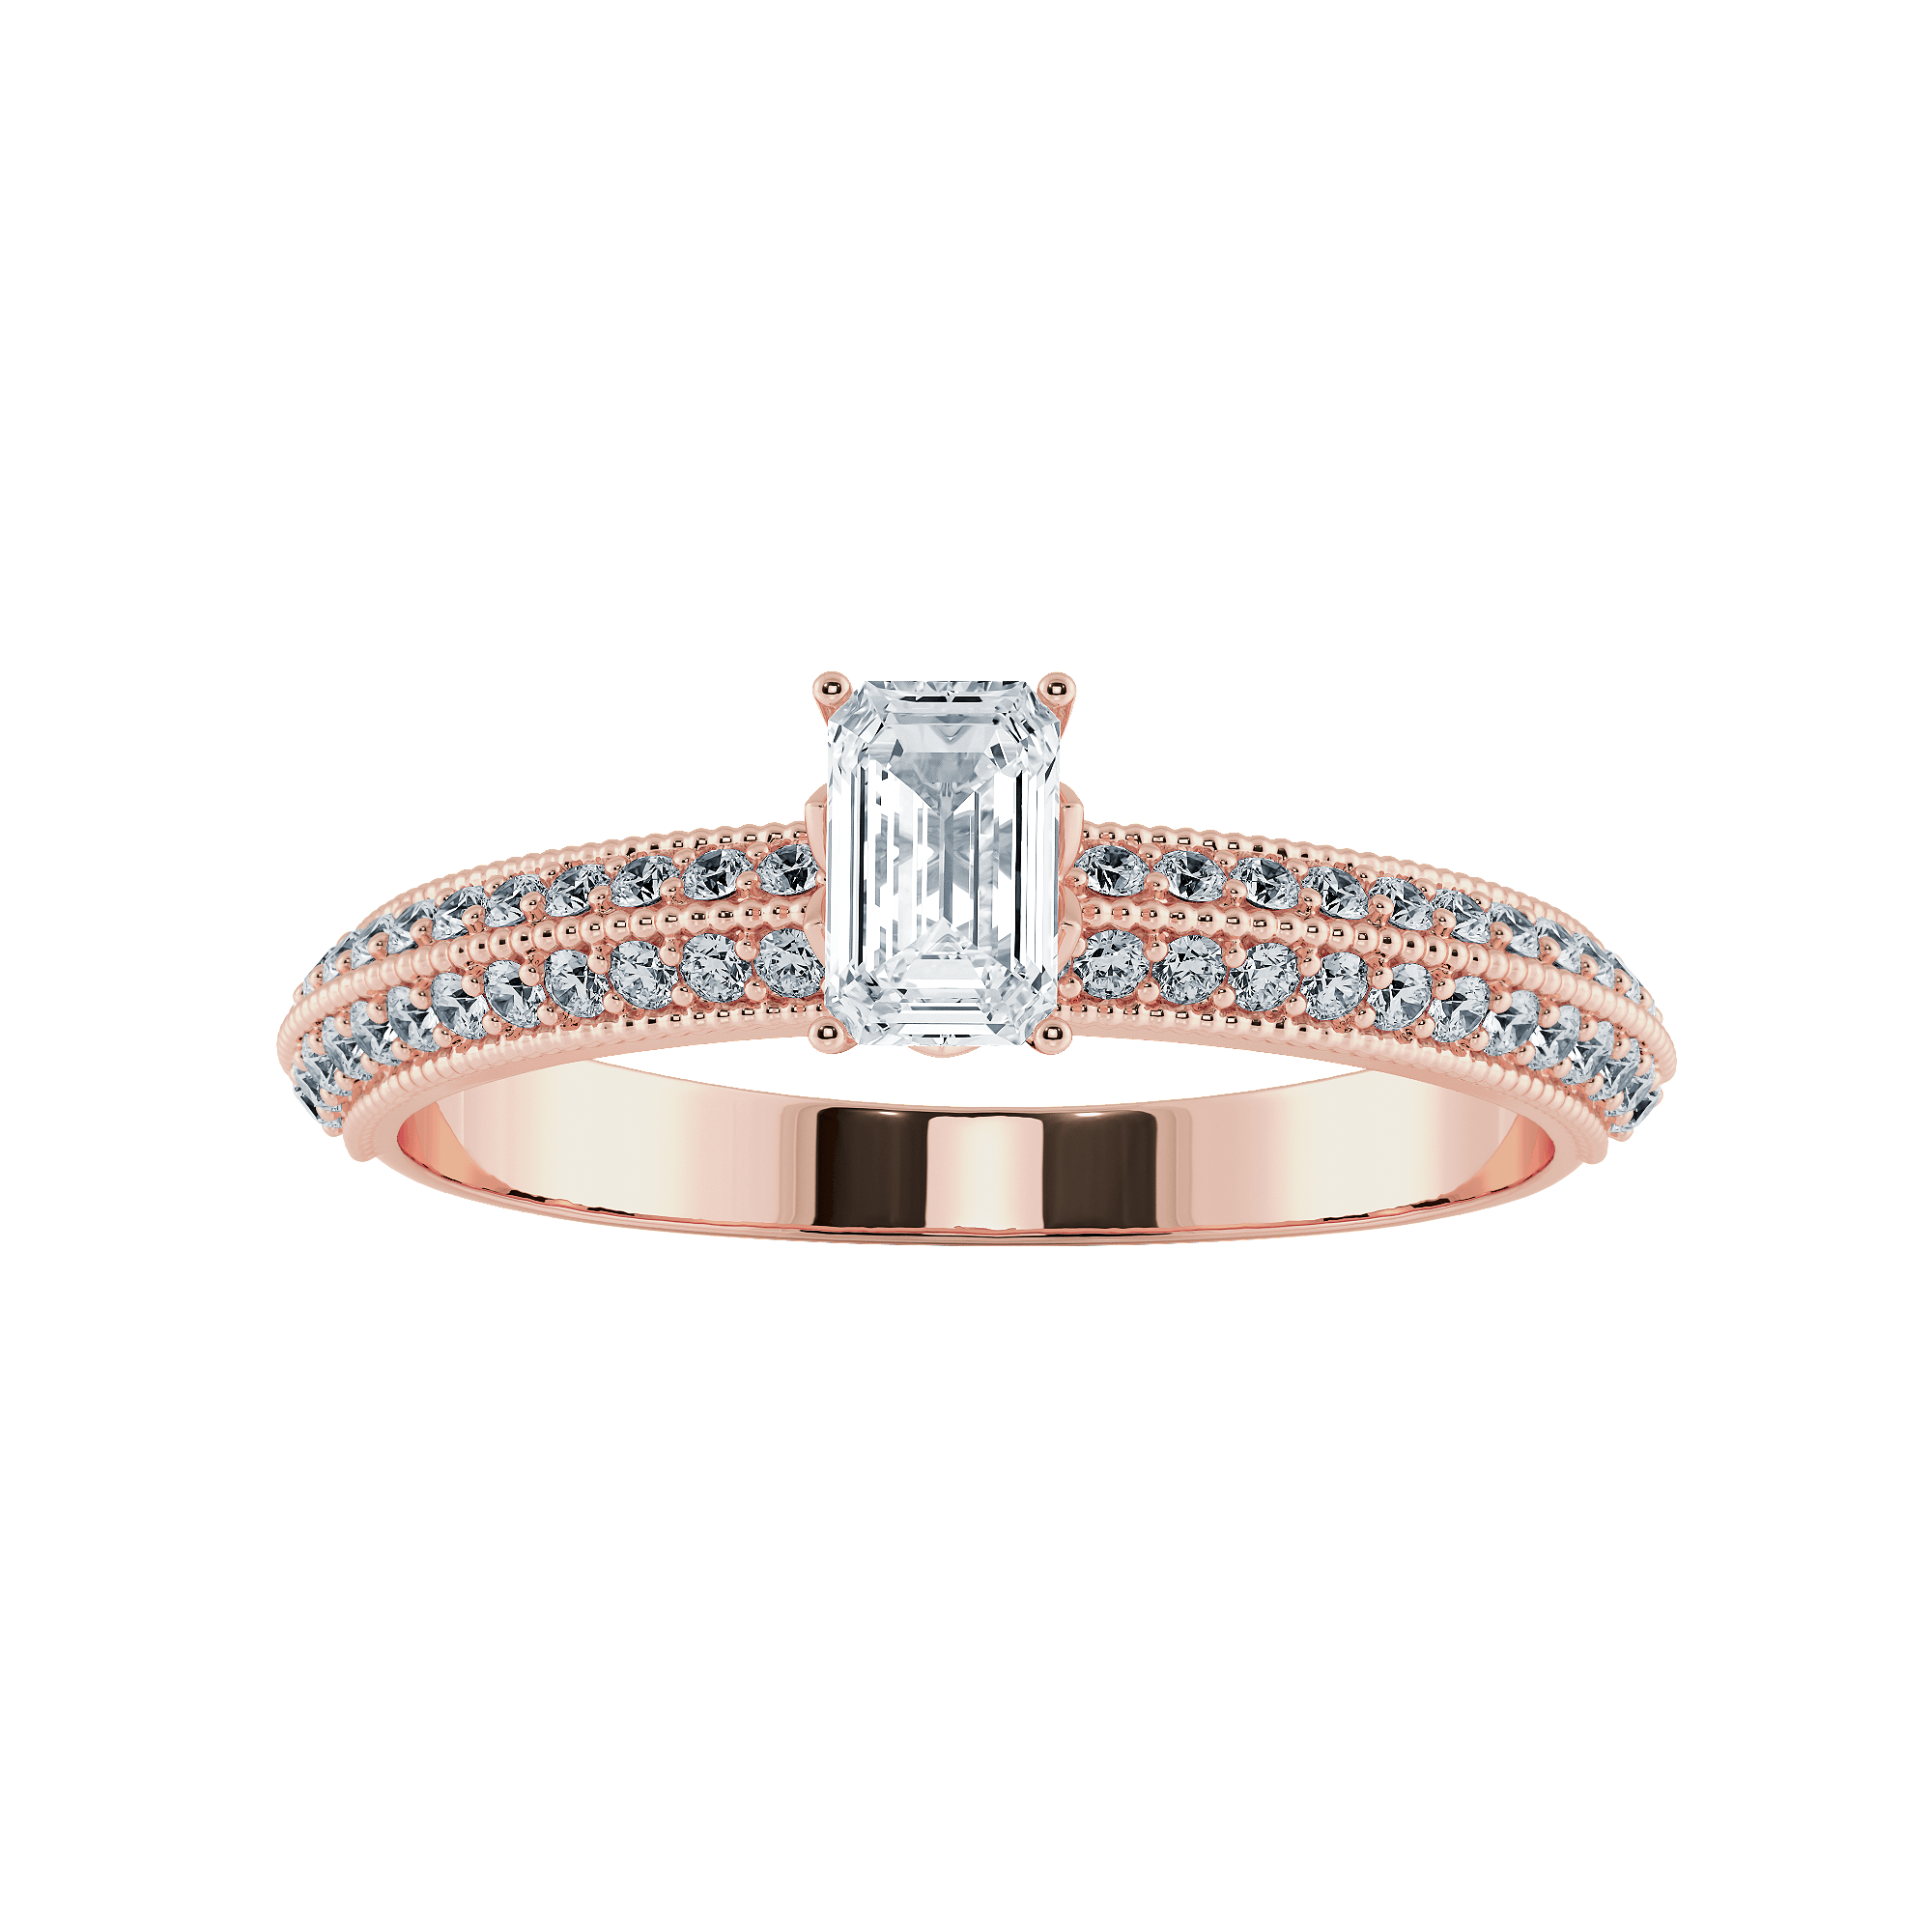 HALF ROSE GOLD RING at Rs 78000 | Gold Rings in Surat | ID: 2853268955888